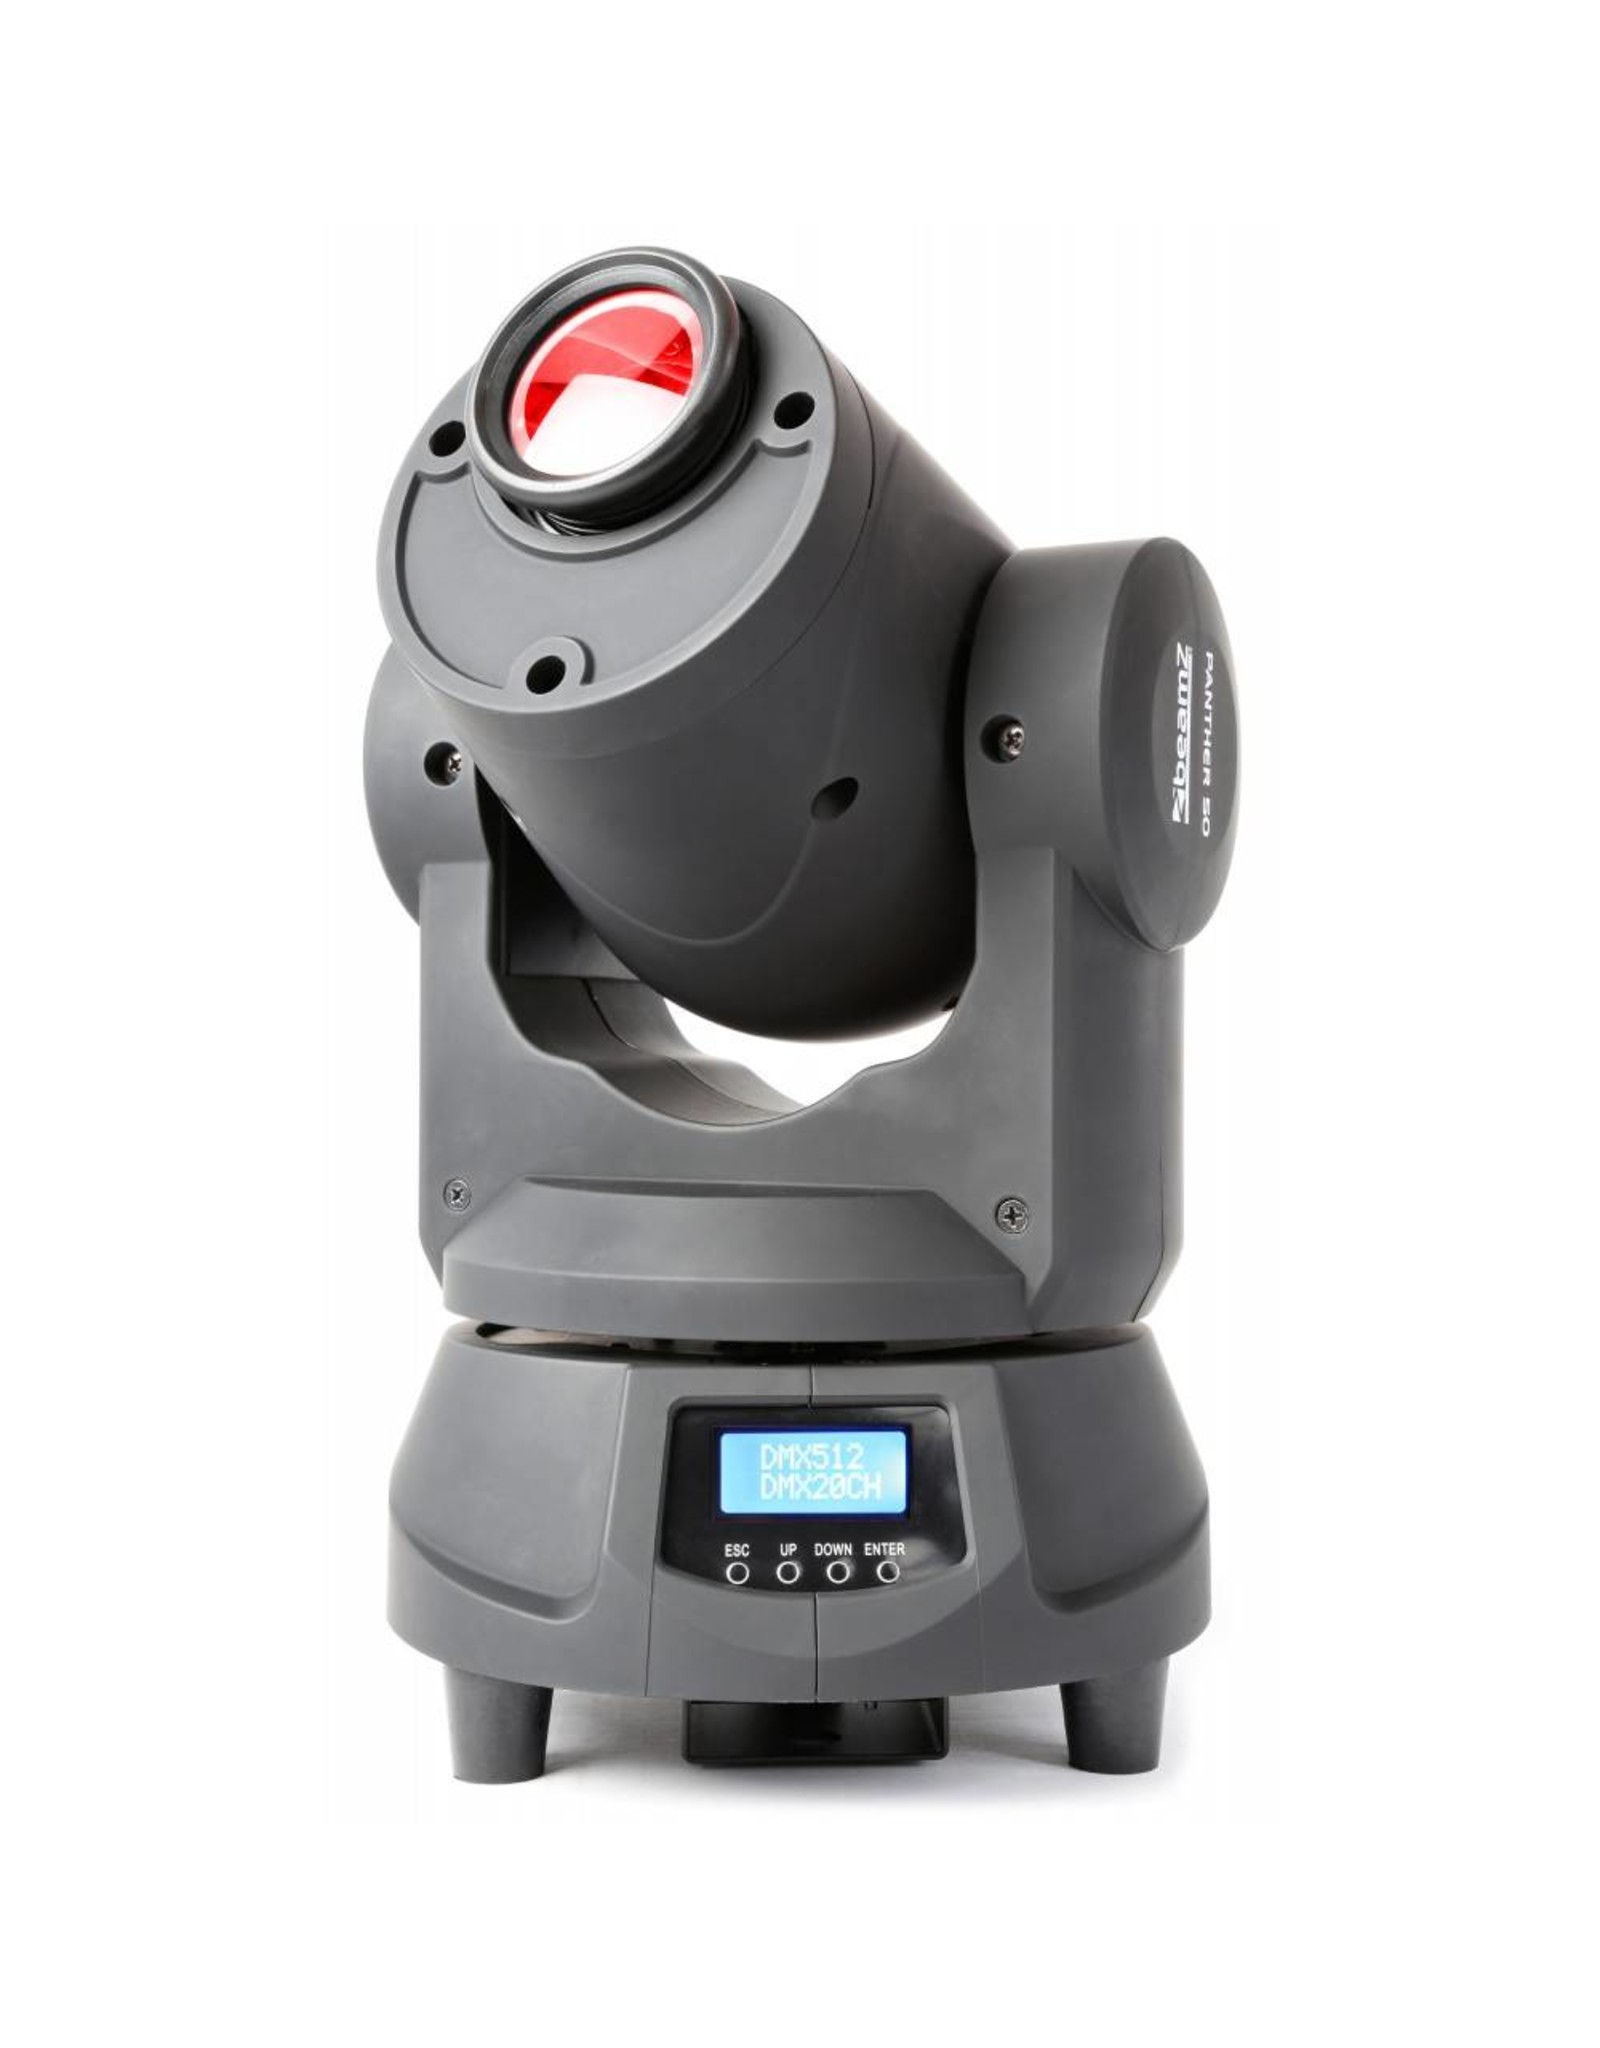 Beamz  Professionelle Panther 50 LED Spot Moving Head Demo